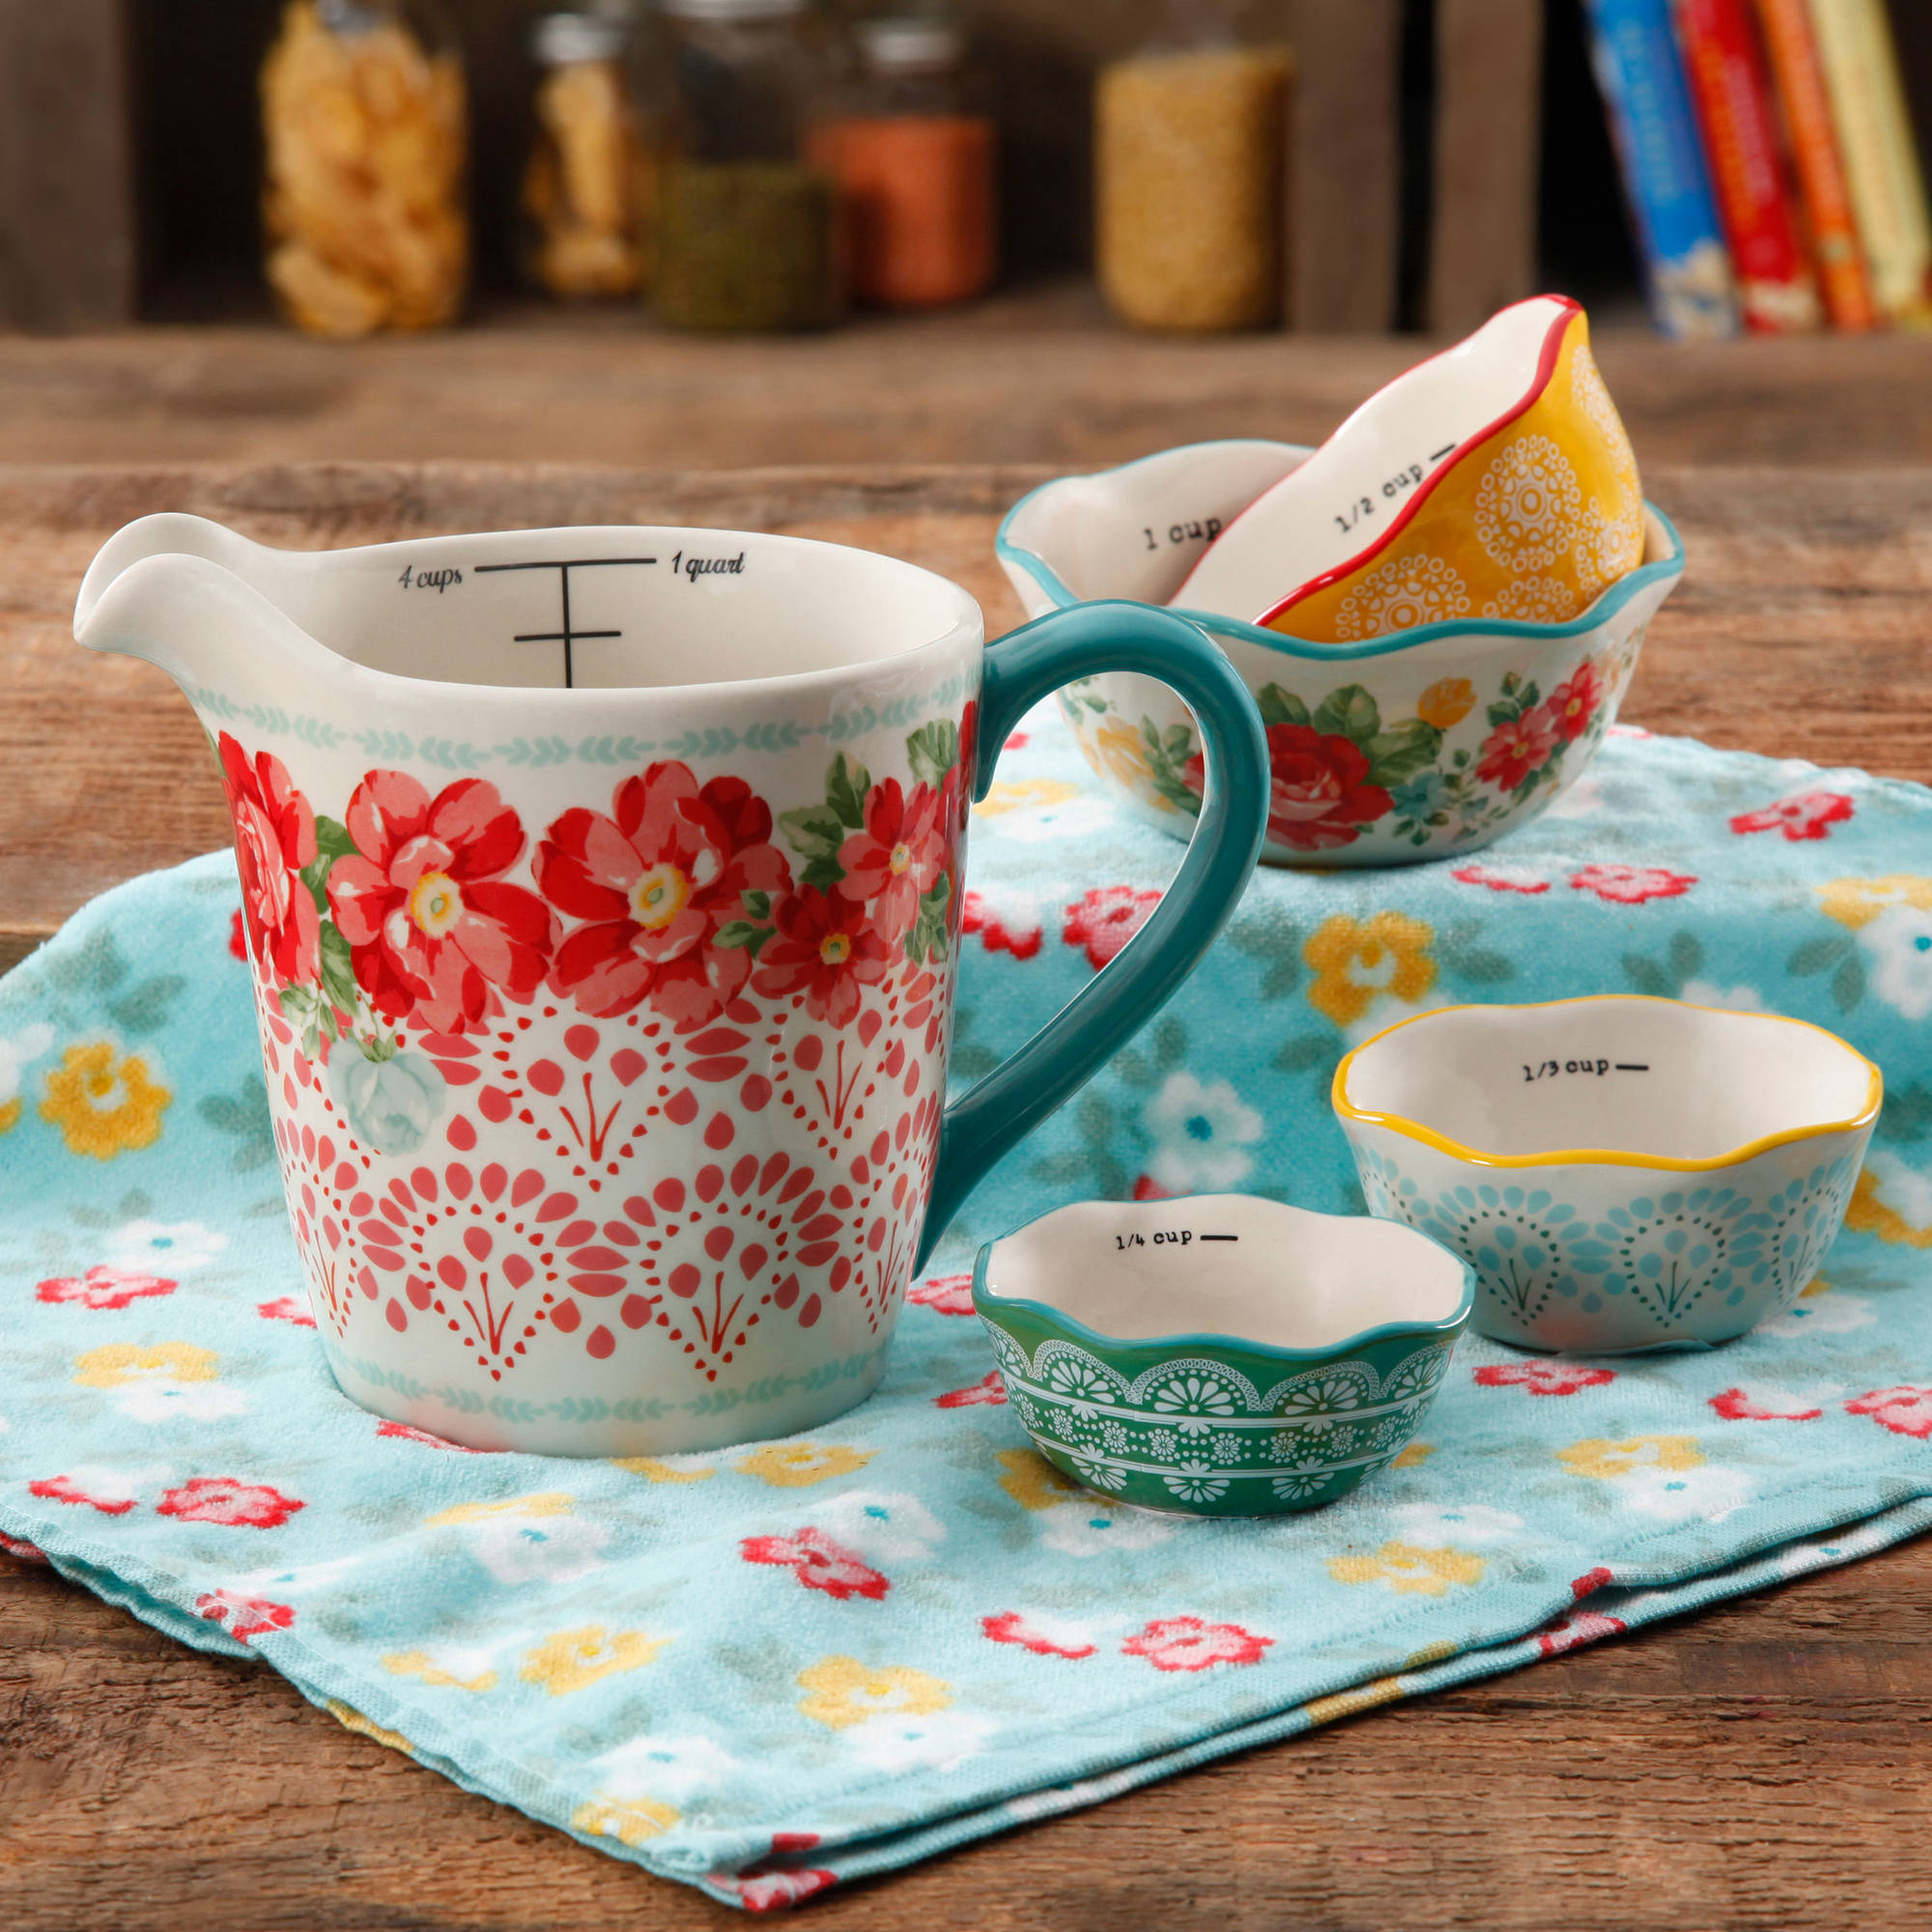 The Pioneer Woman 5-Piece Prep Set, Measuring Bowls & Cup - image 4 of 9